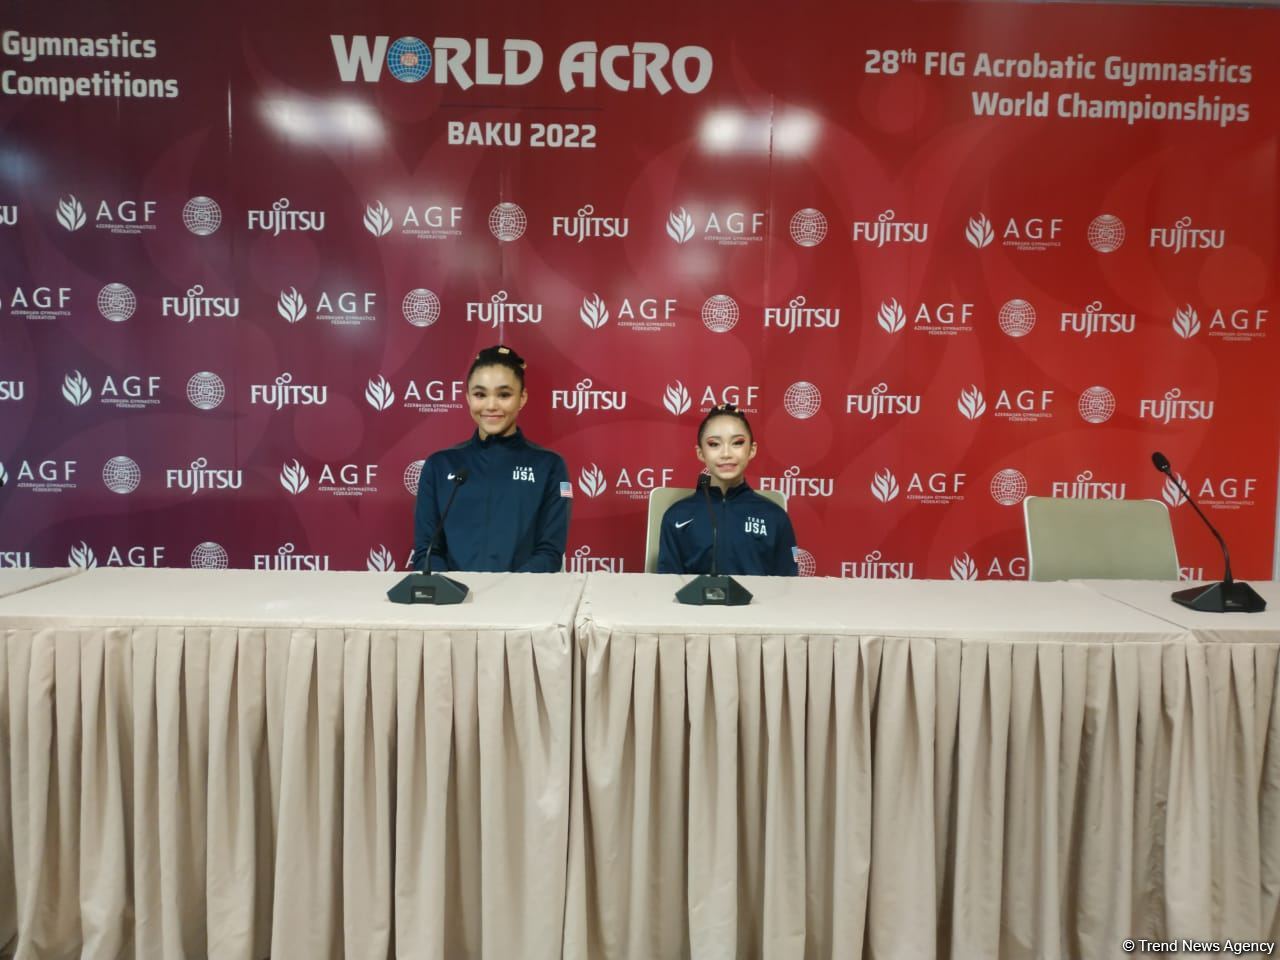 US athletes talk participation in Acrobatic Gymnastics World Age Group Competitions in Baku